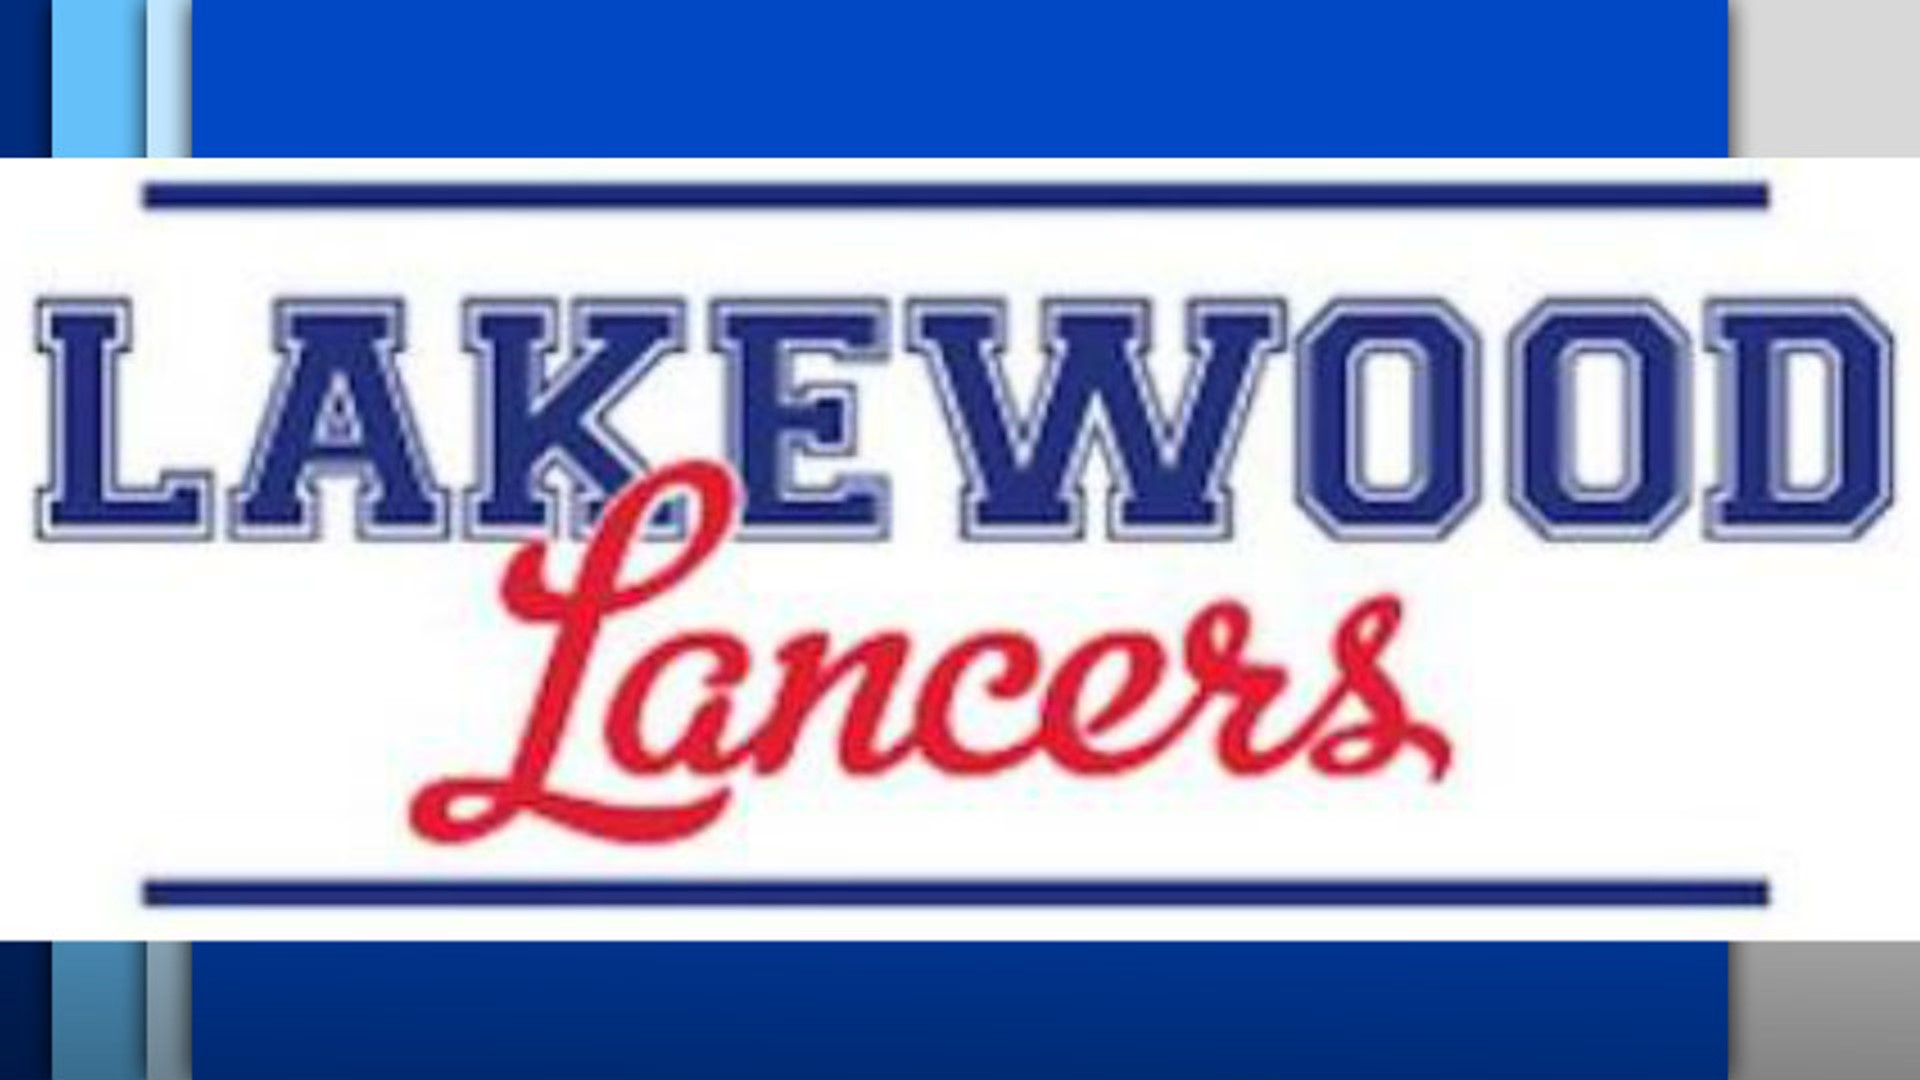 Lakewood Local Schools closed Friday as precaution after students